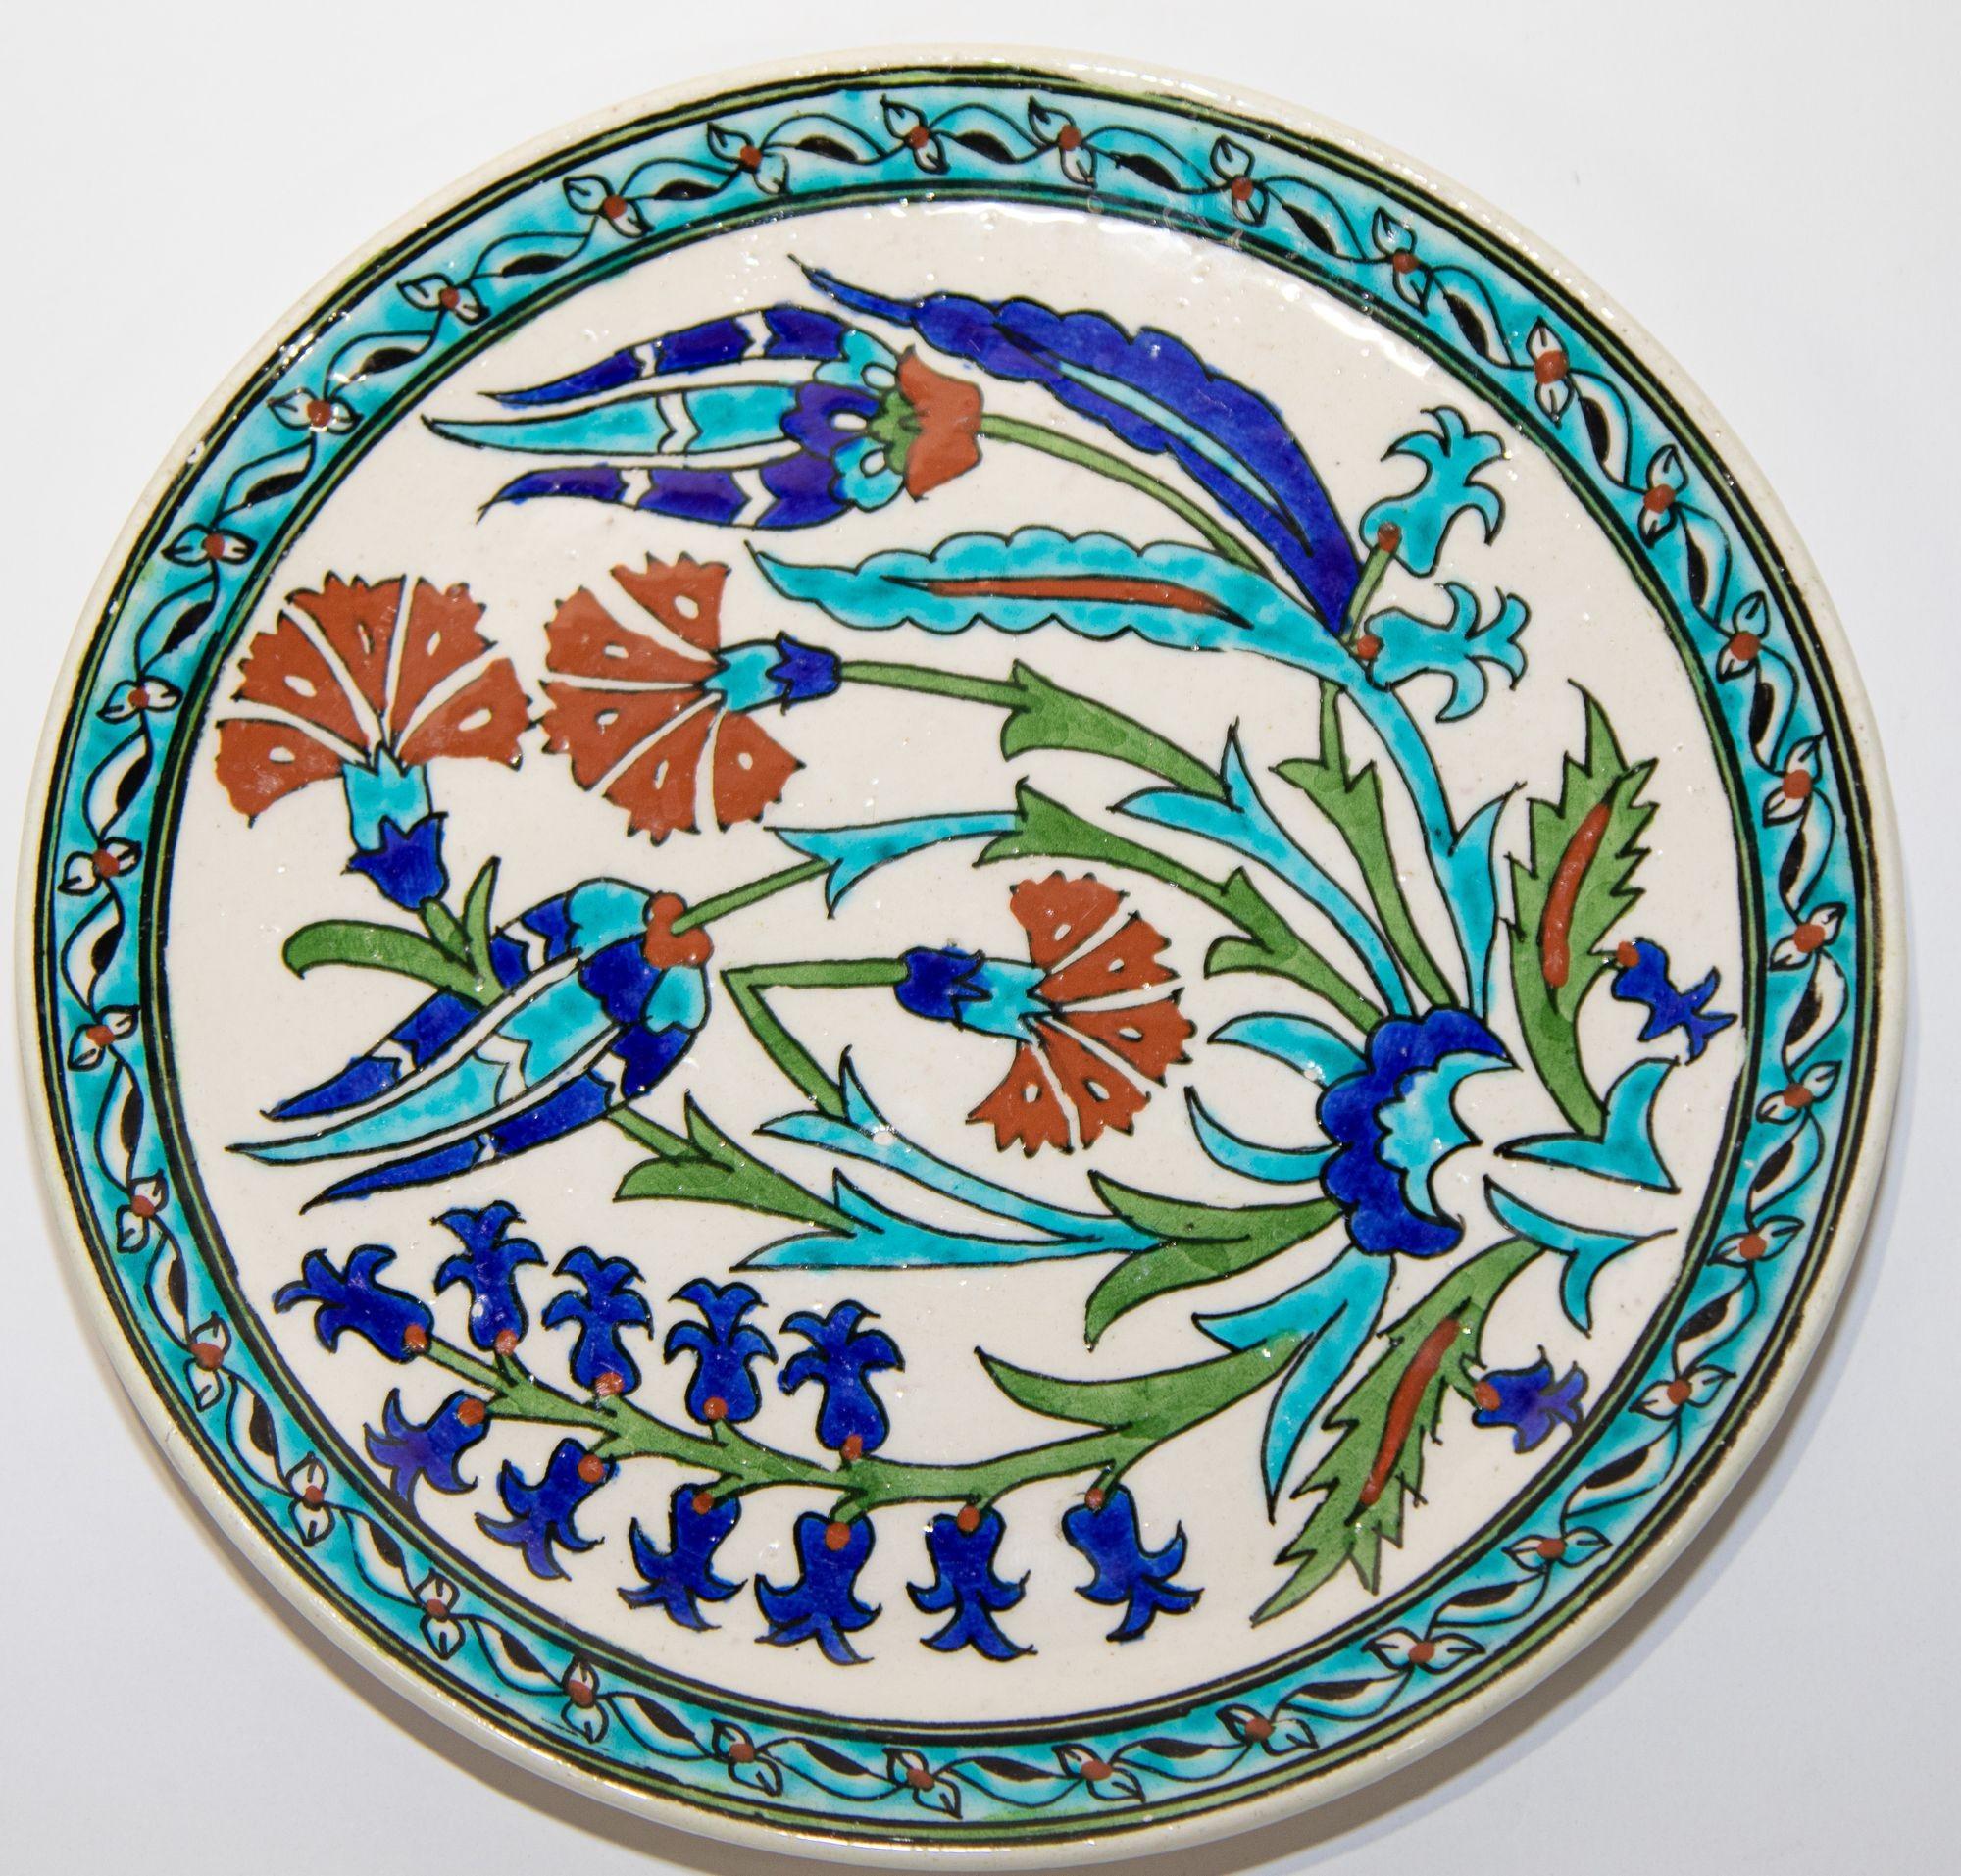 Turkish polychrome hand painted ceramic Kutahya decorative hanging Plate.
Kütahya is famous for its kiln products, such as tiles and pottery, which are glazed and multicolored.
It has a beautifully hand painted flowers in burgundy, turquoise,